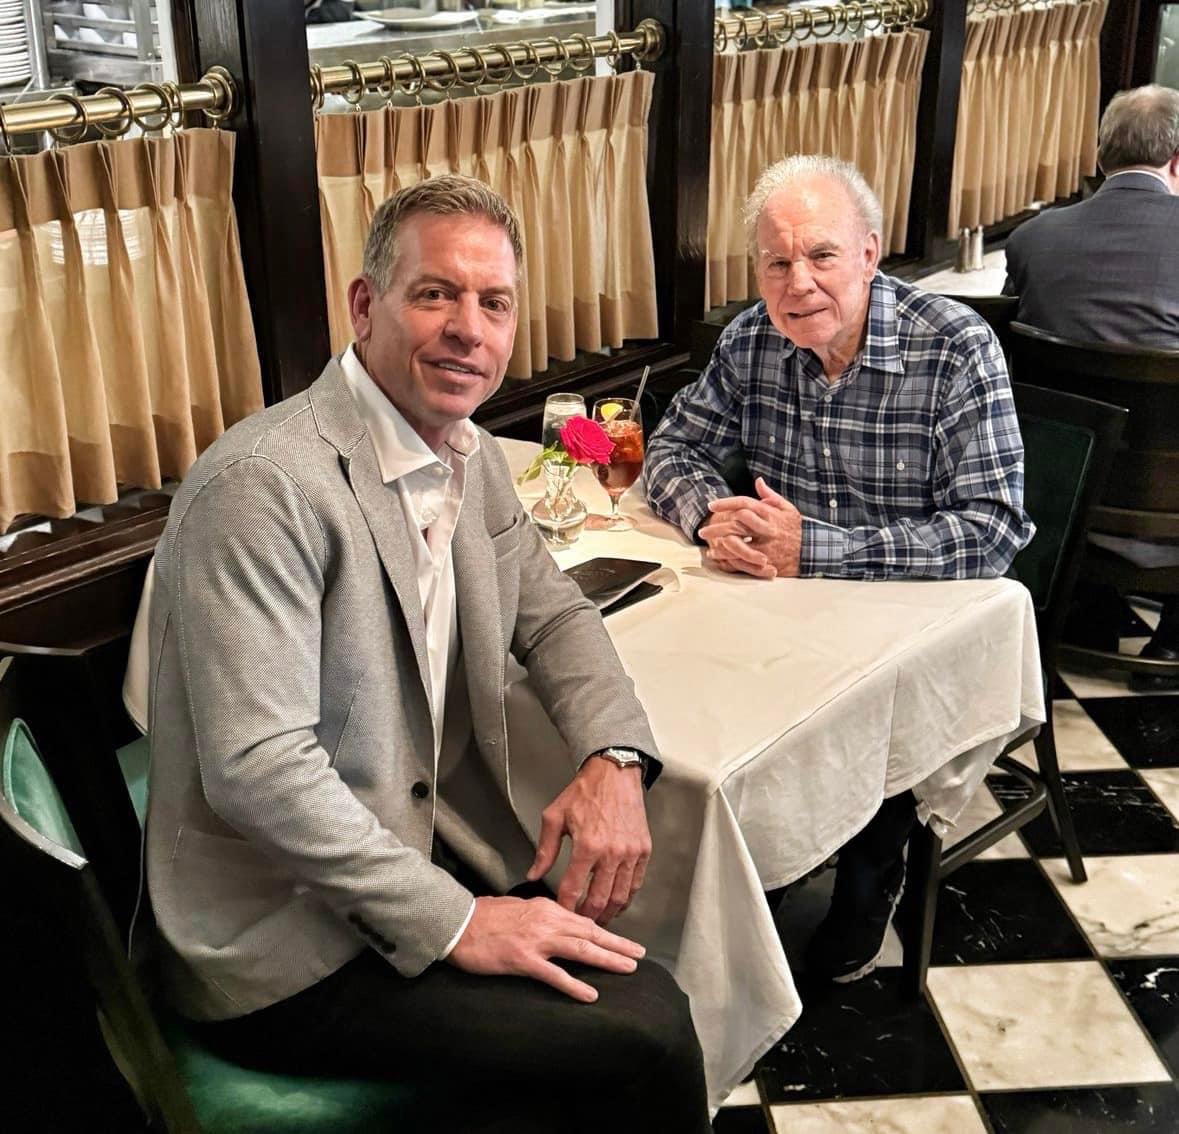 Troy Aikman has posted this picture with the great Roger Staubach with the caption: “Lunch With My Idol”. Both Cowboys & NFL Legends! #Cowboys